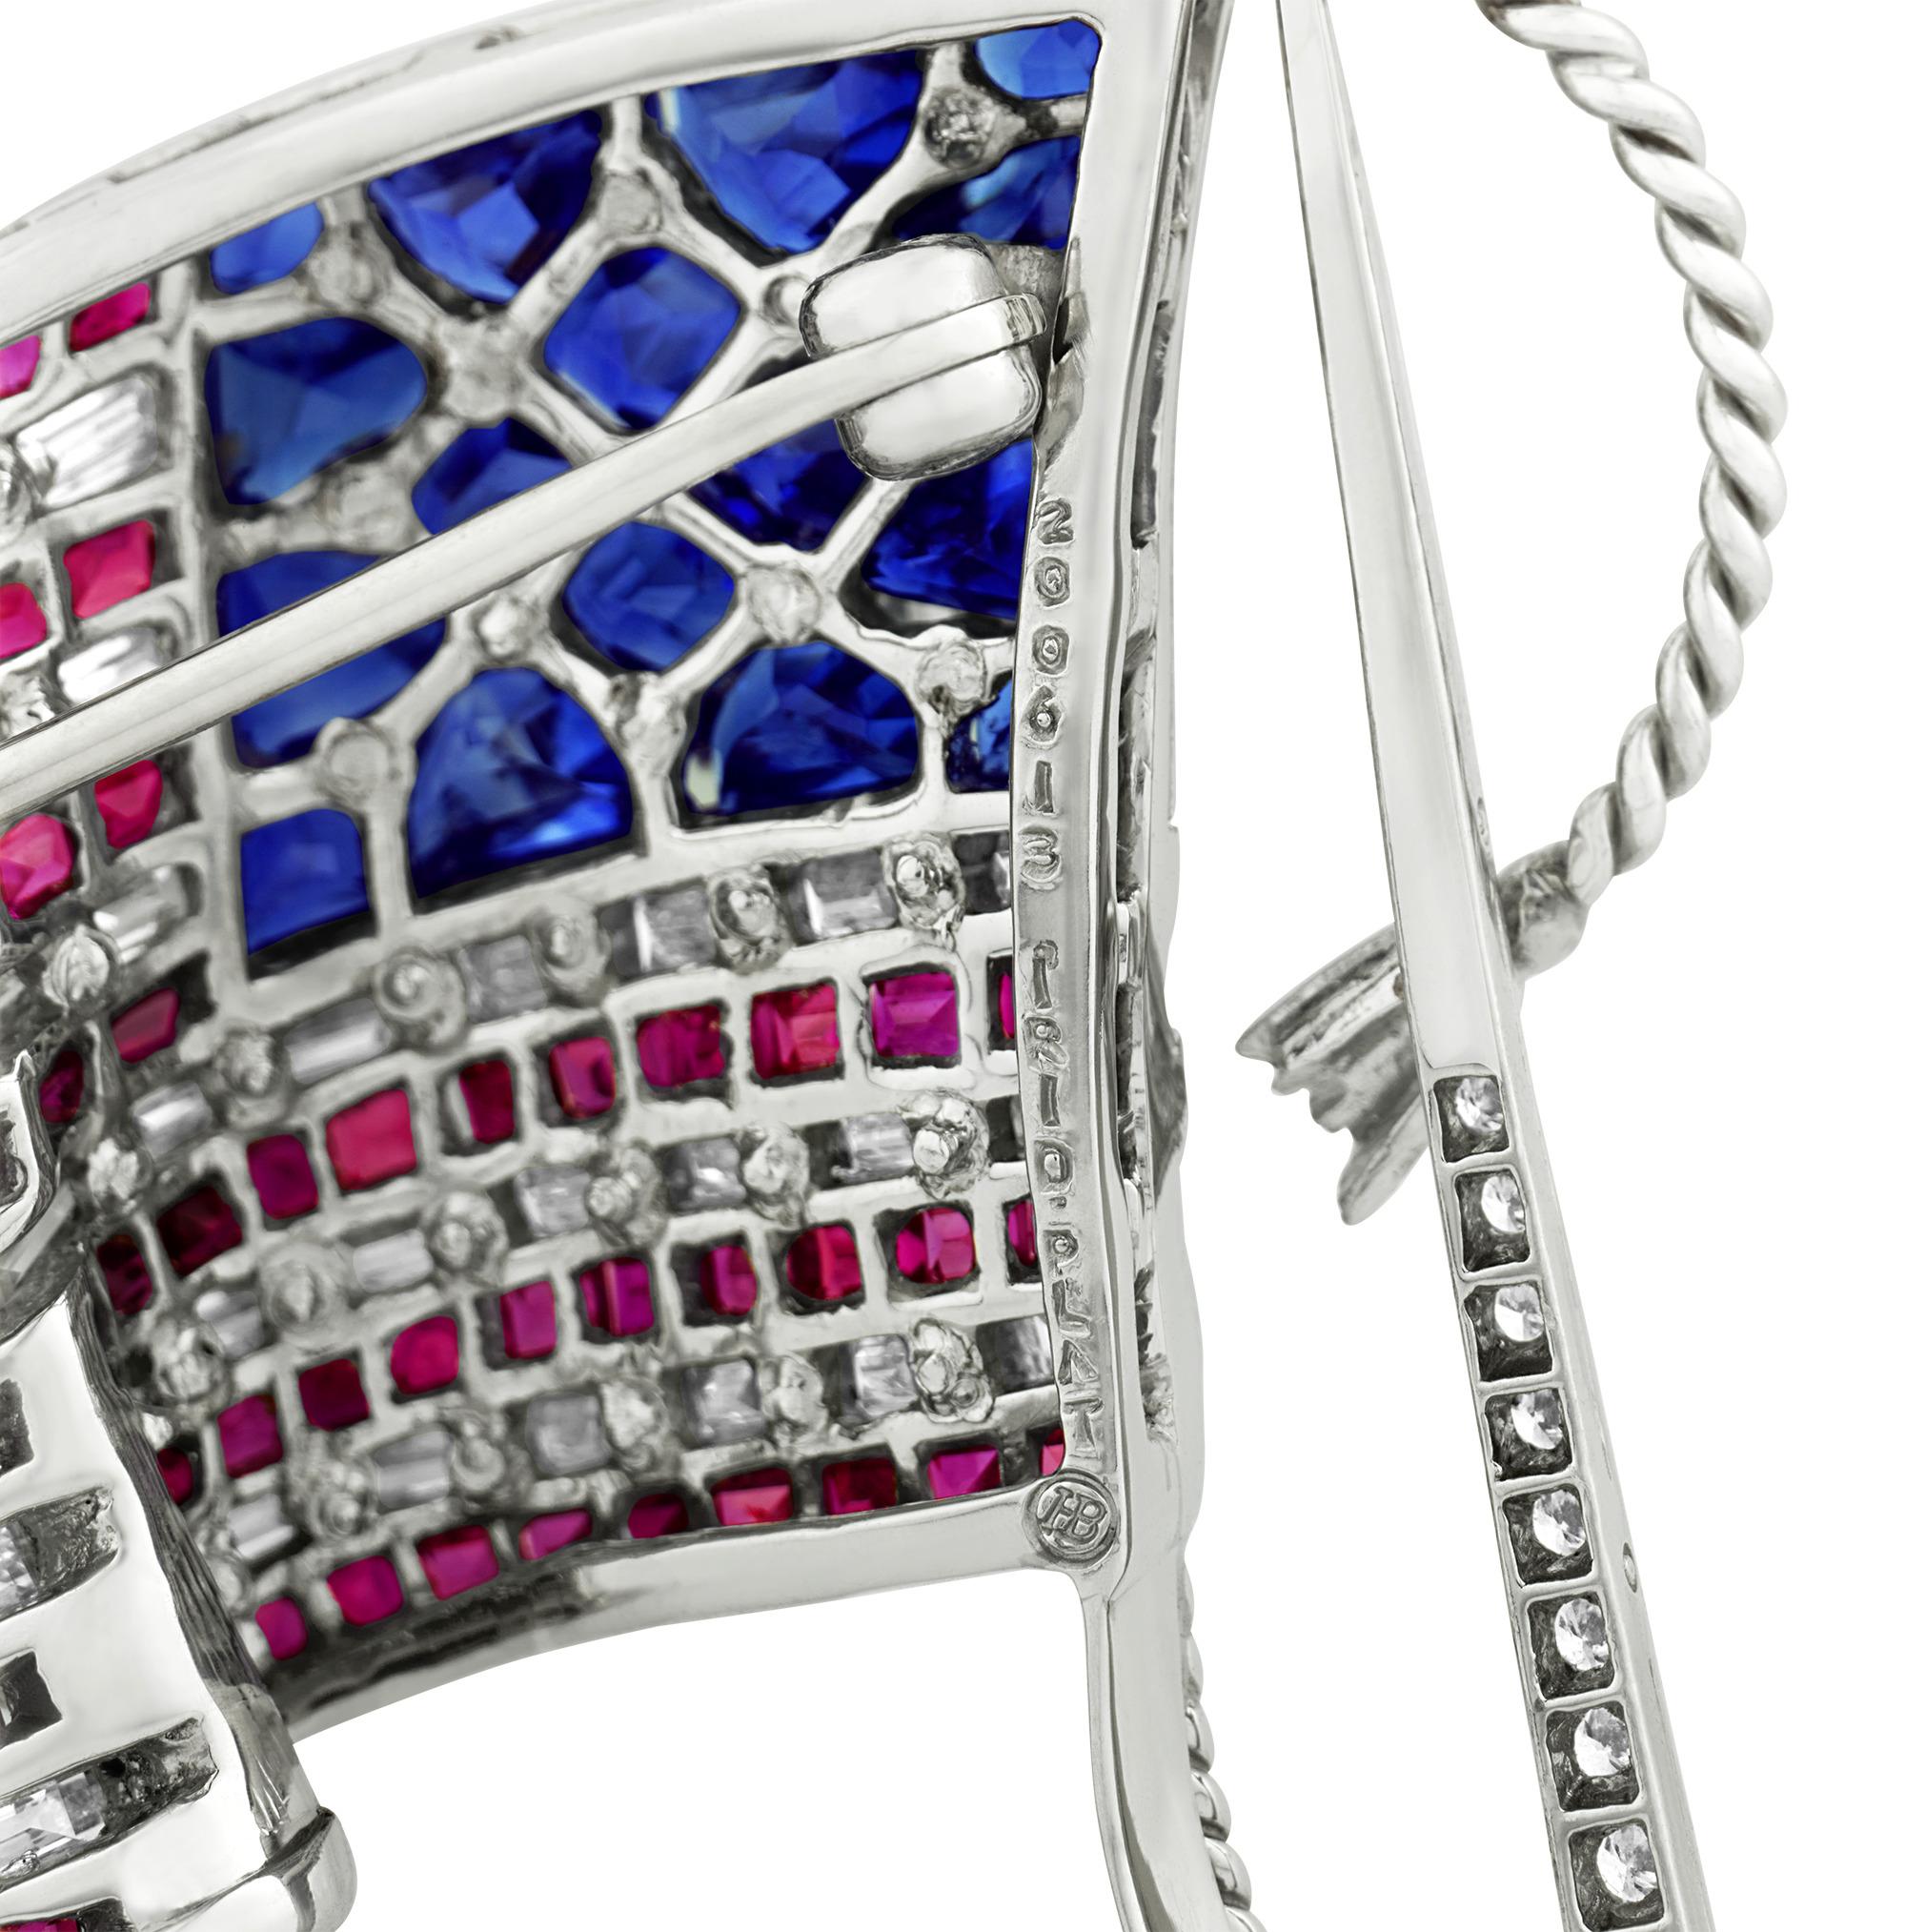 Depicting a waving American flag, this patriotic gemstone creation was crafted by the famed American jeweler Oscar Heyman. Using dozens of sparkling white diamonds, rubies and sapphires, the design brilliantly captures the undulating form of the